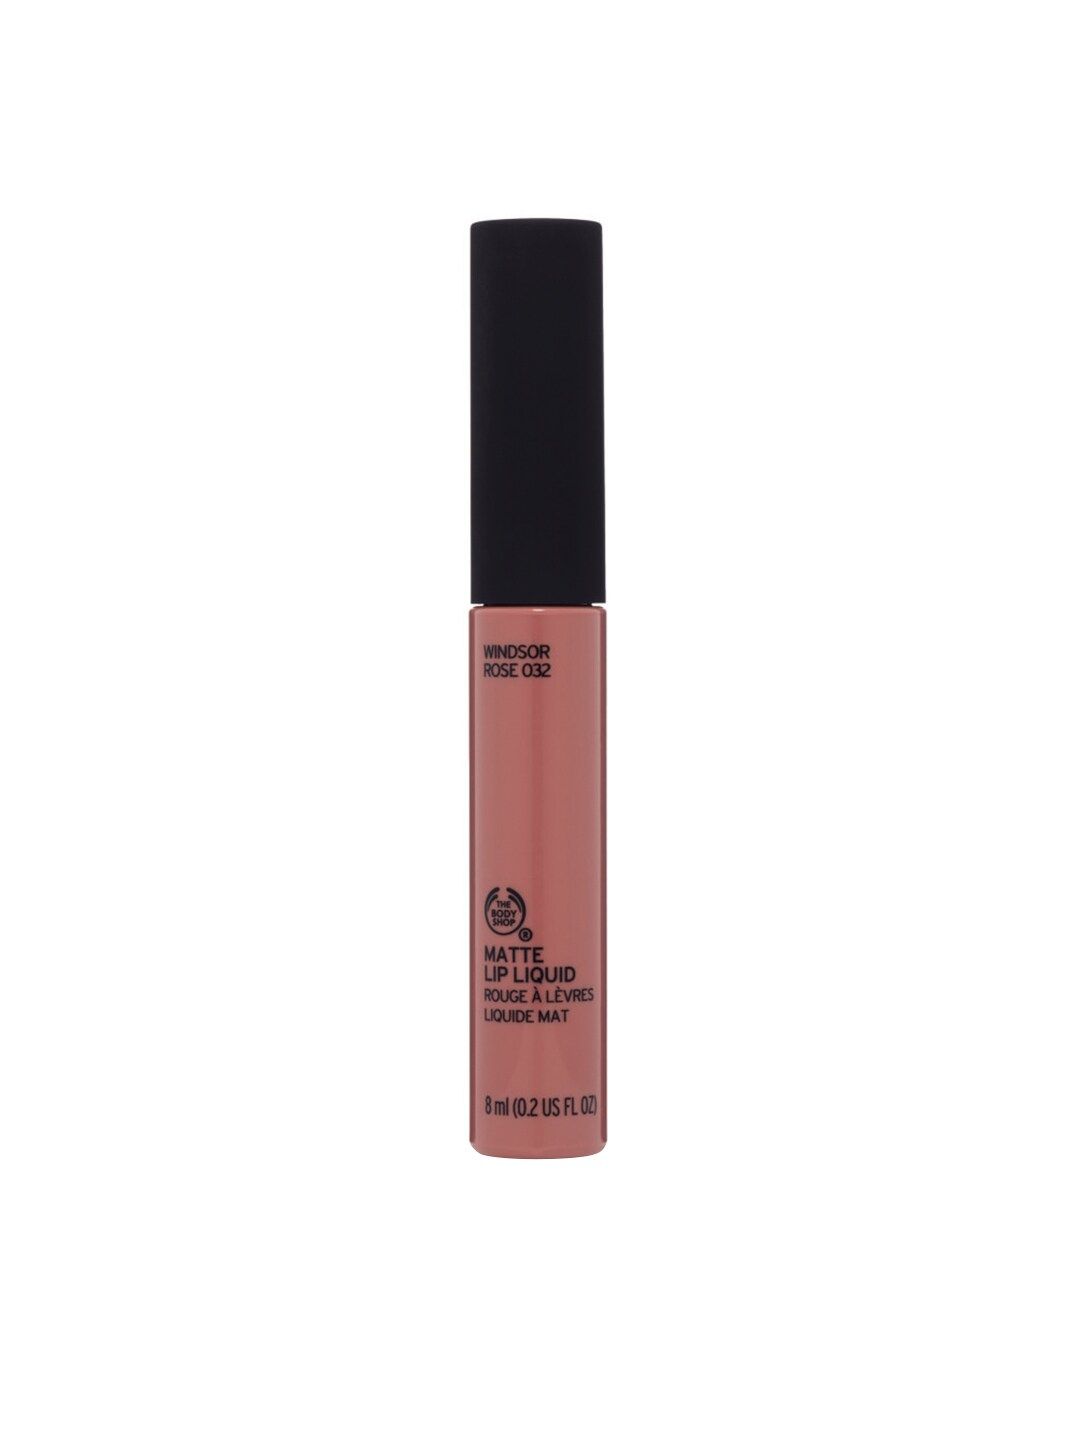 THE BODY SHOP Pink Windsor Rose Matte Sustainable Lip Liquid 032 Price in India